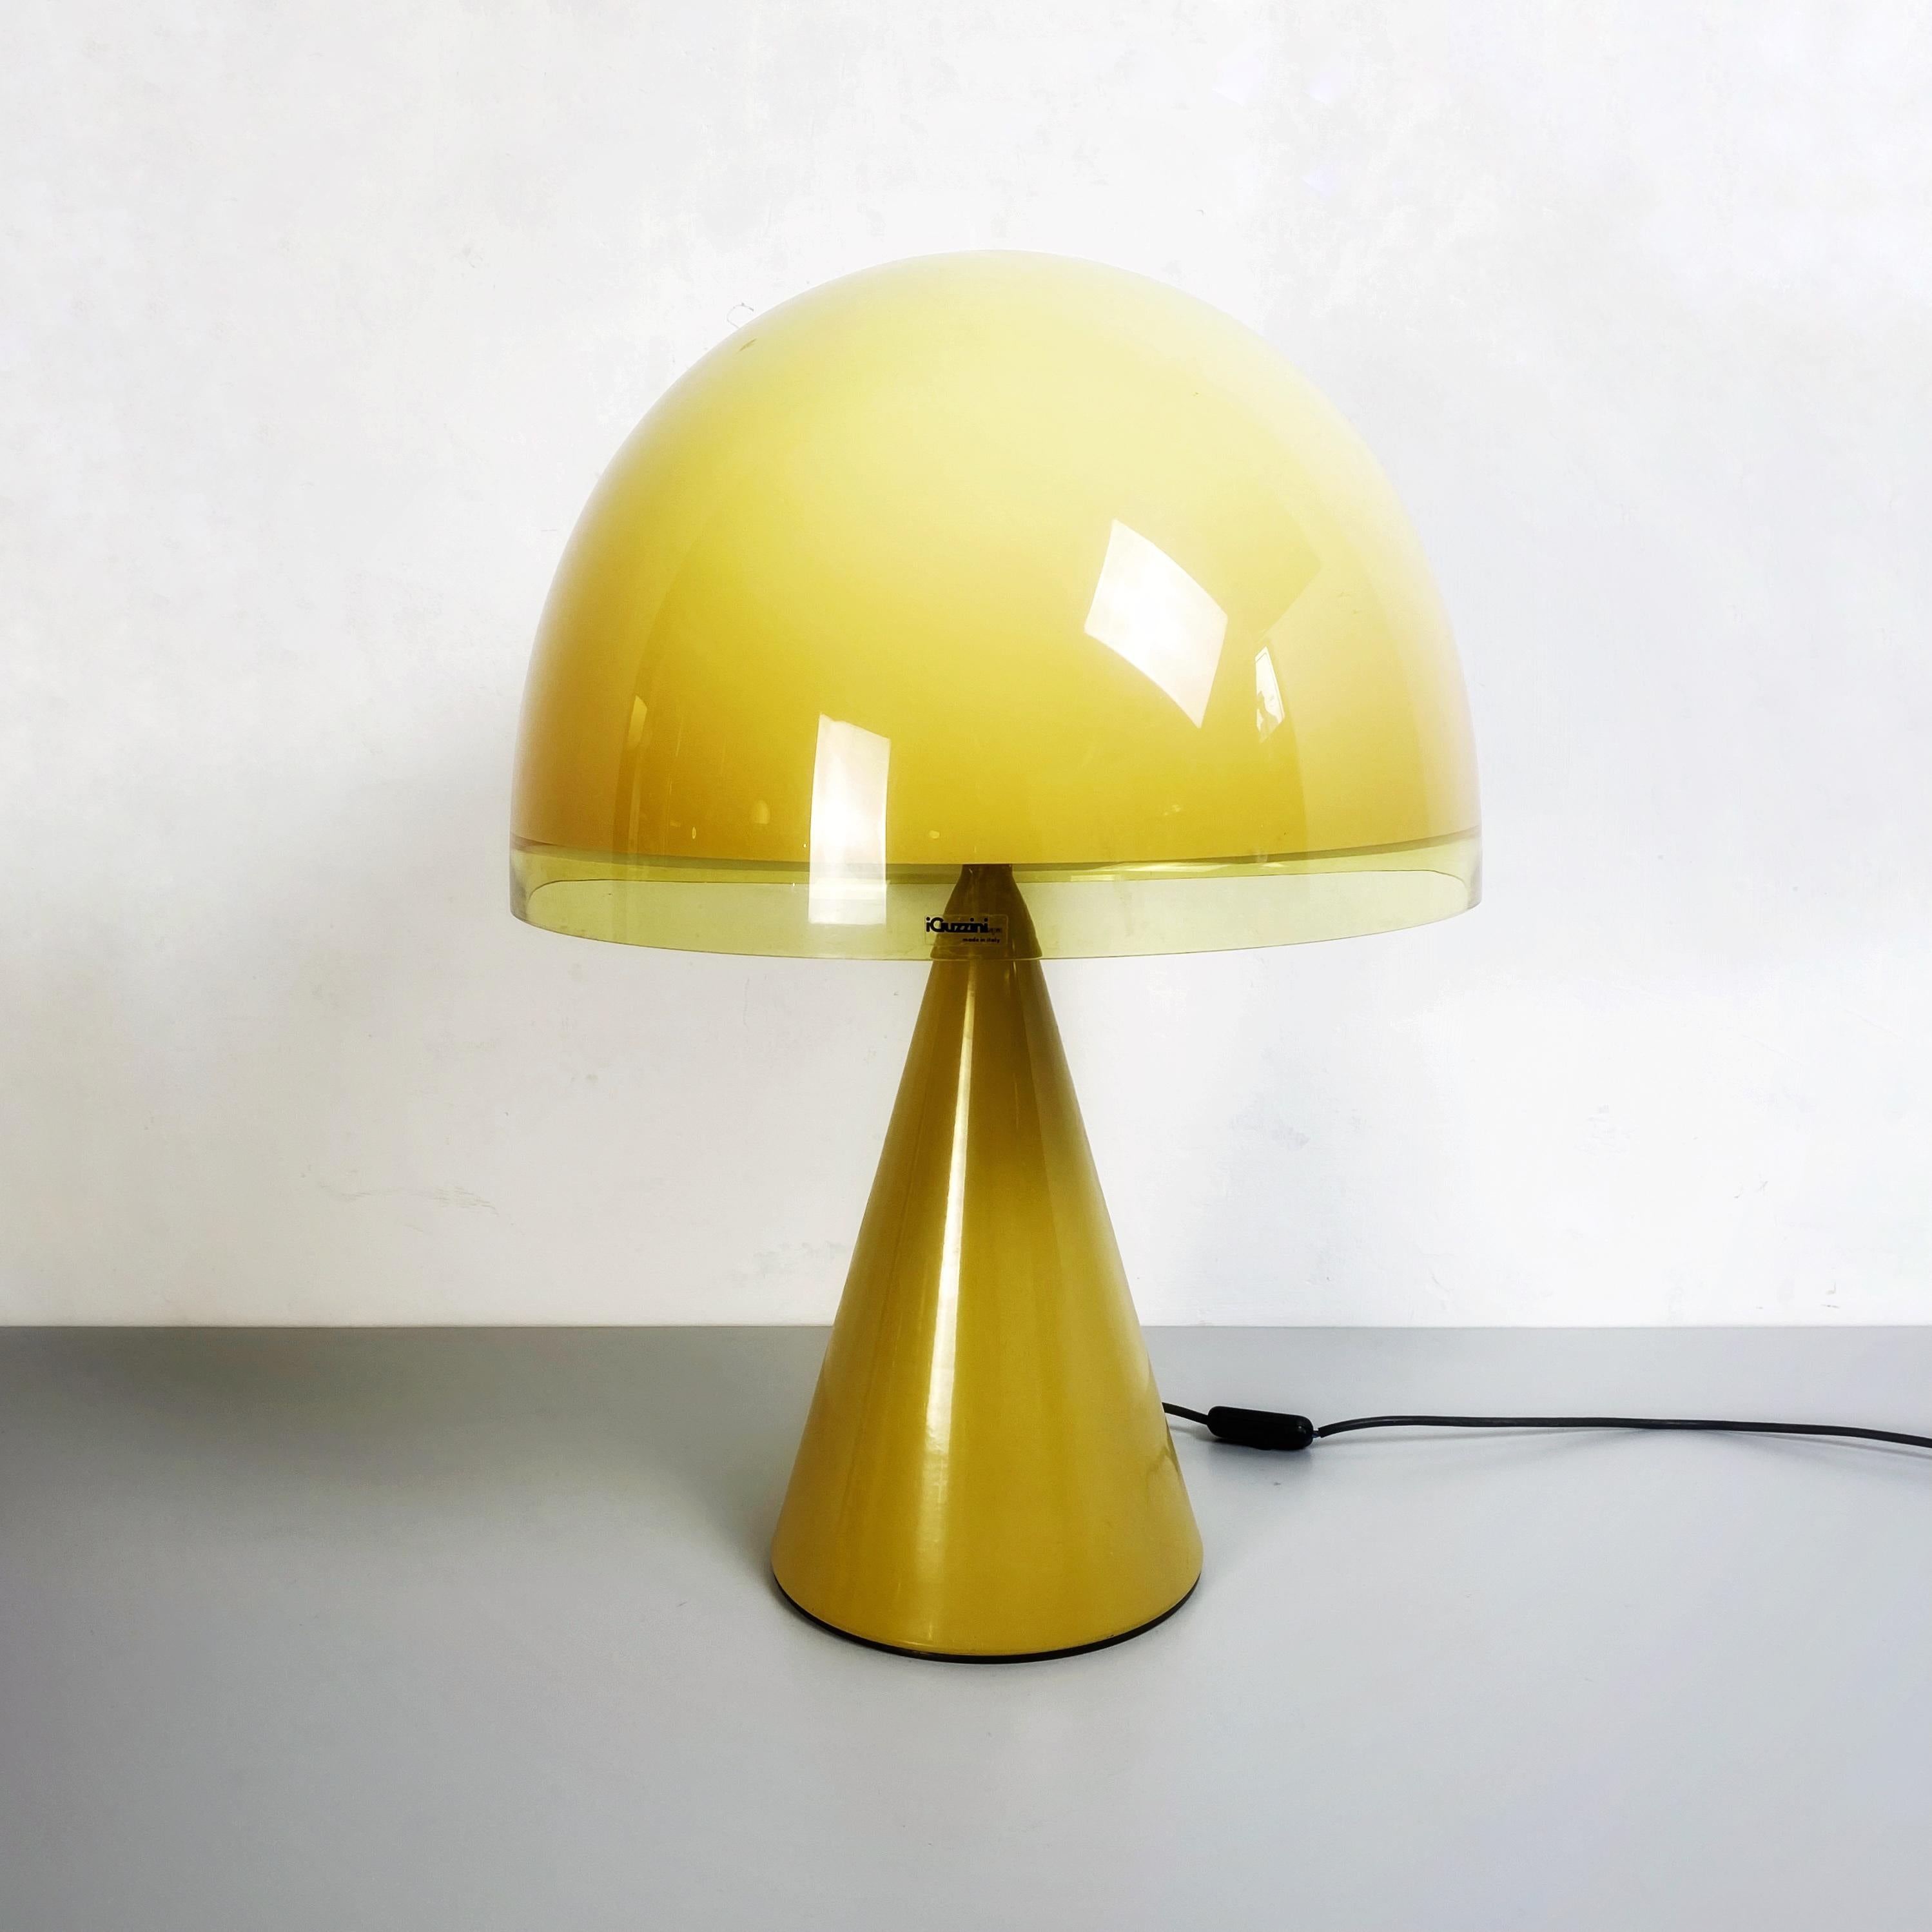 Italian mid-century modern Baobab 4044 table lamp by iGuzzini, 1980s
Baobab 4044 table lamp with conical base in ocher yellow metal painted and ocher yellow acrylic mushroom lampshade.
This small version was in production until 1992, the model